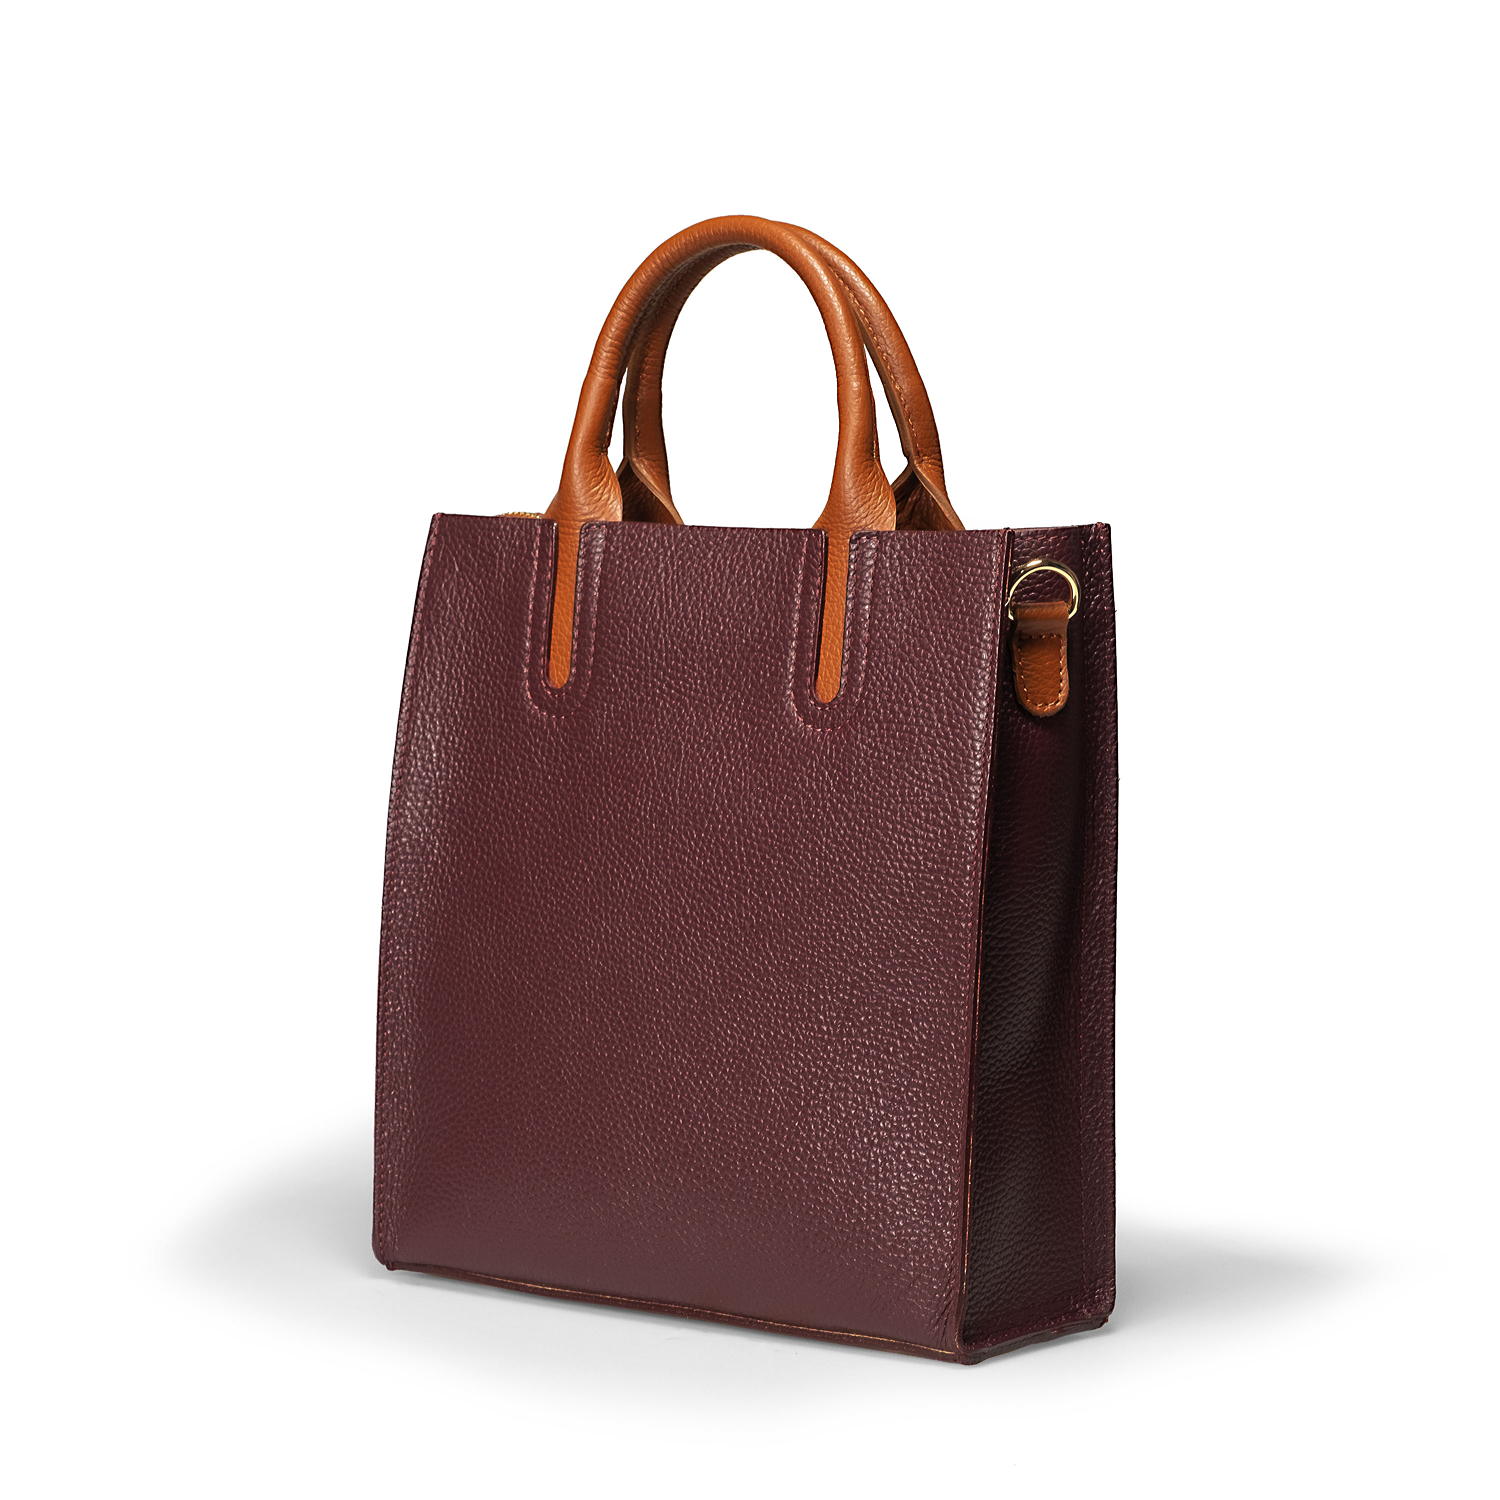 Low cost leather handbags Made in Italy by Bellini. Wholesale, OEM, private label handbags.